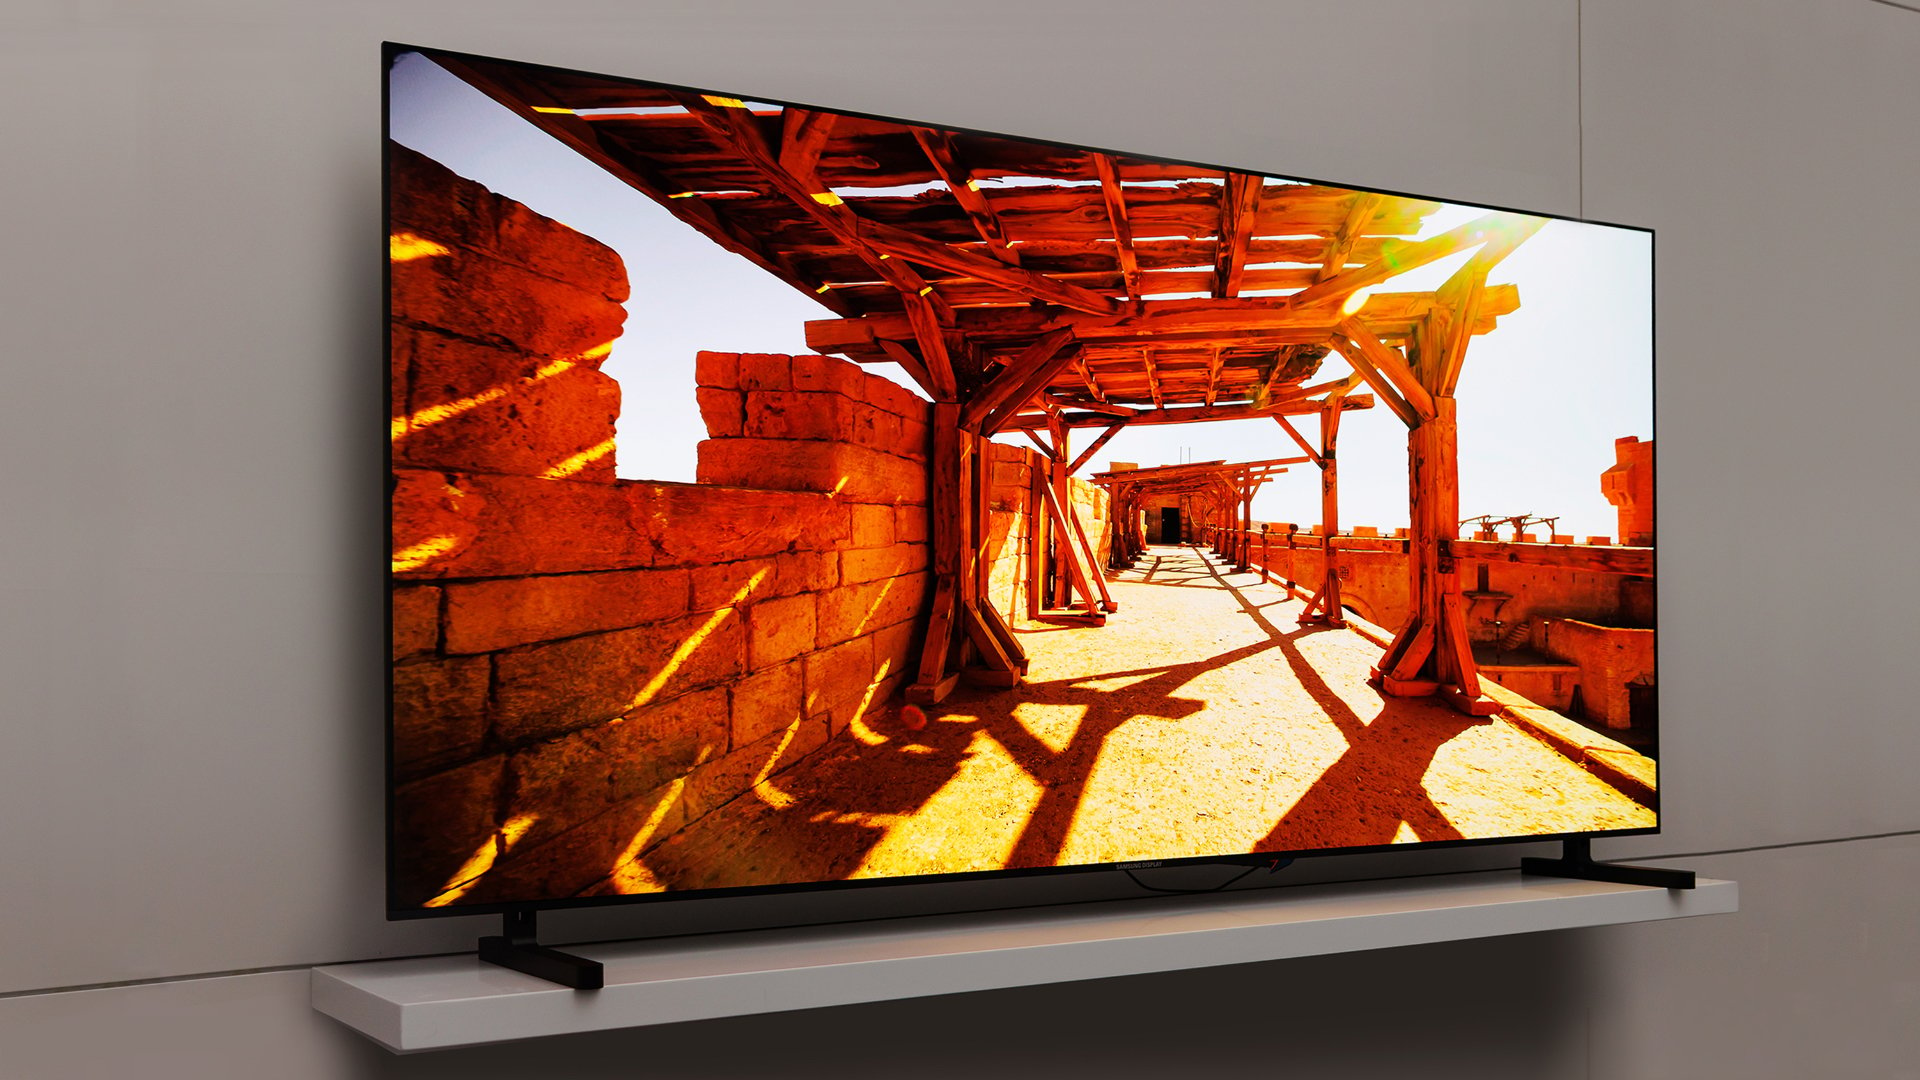 Samsung set to get more competition in the OLED TV segment - SamMobile